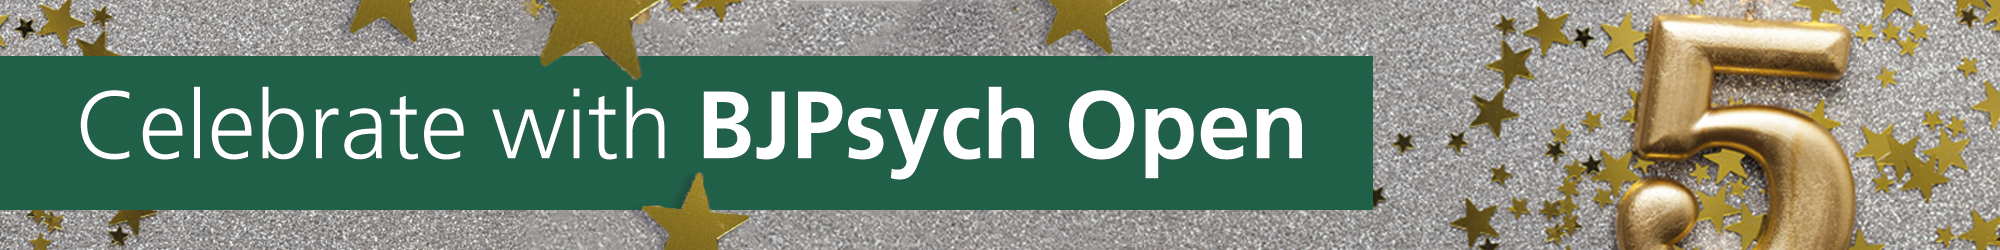 Celebrate with BJPsych Open Banner